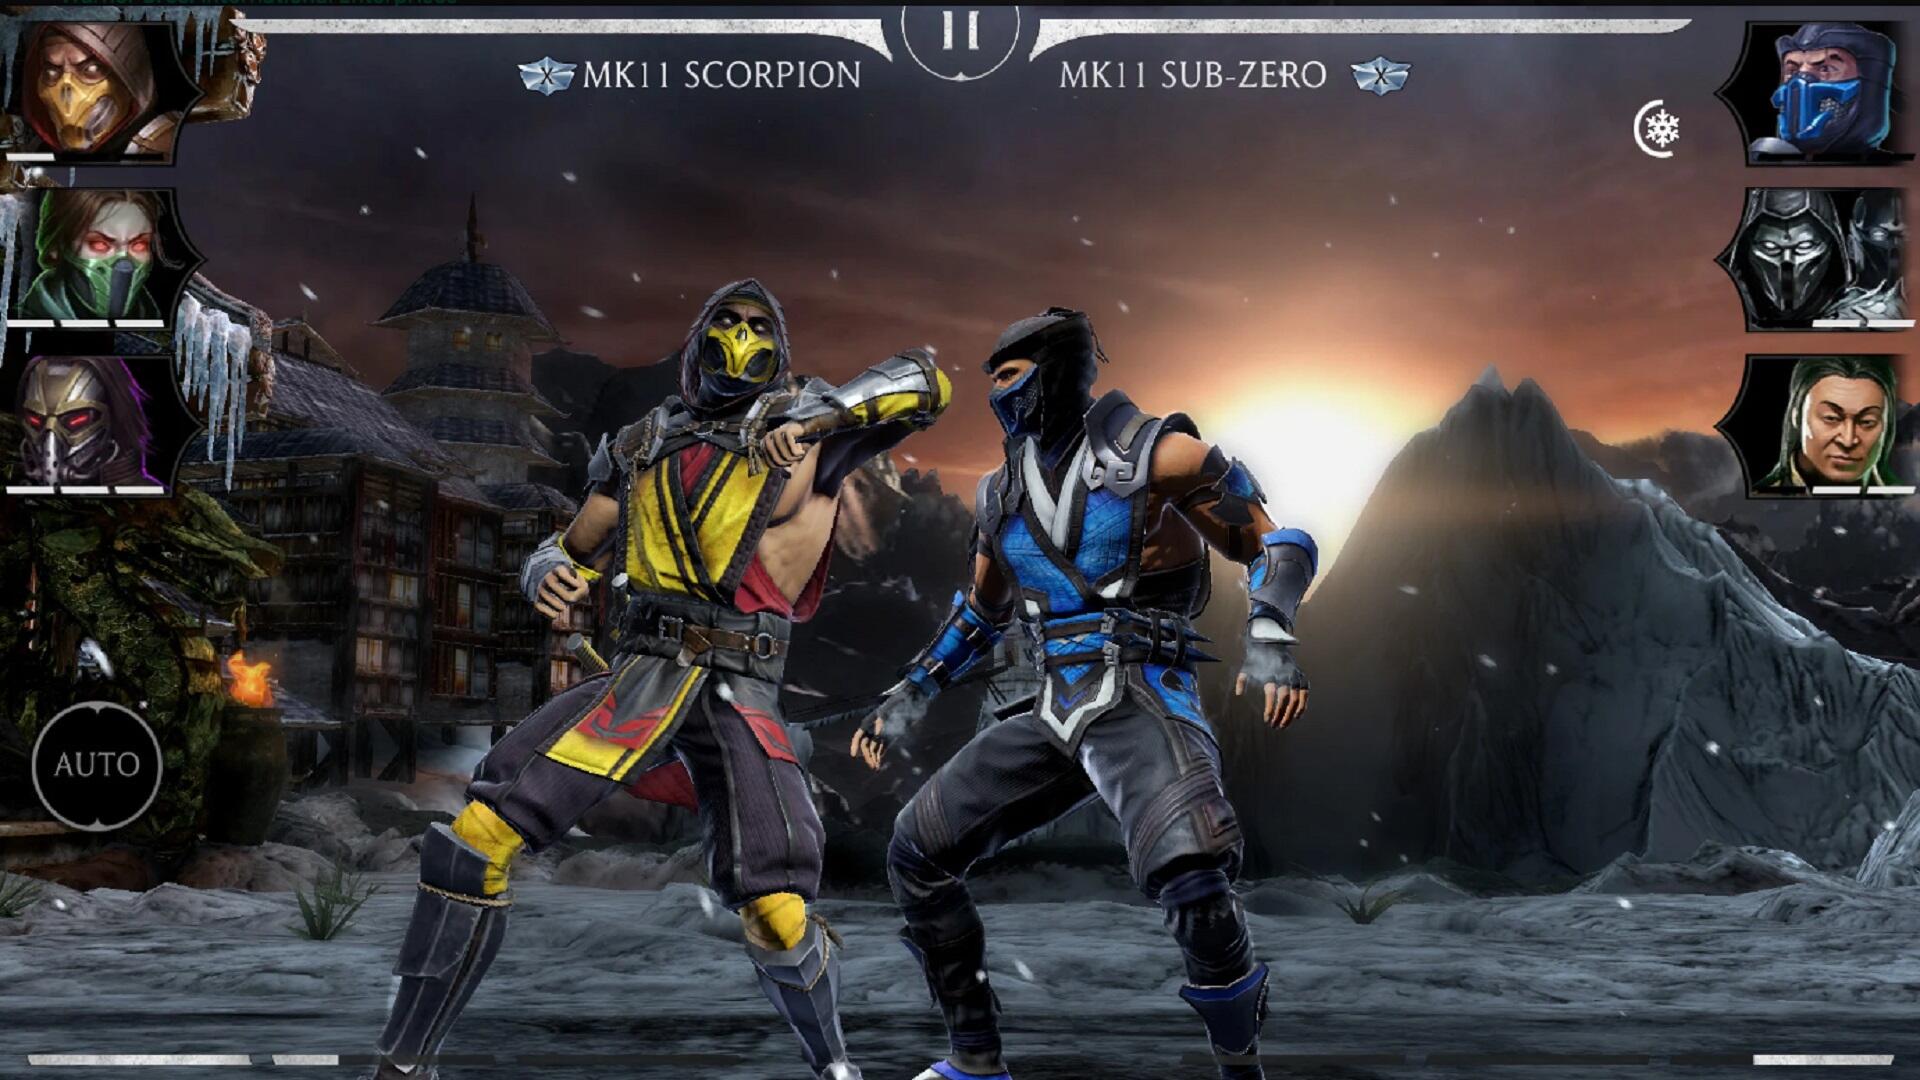 Fighters Mortal Kombat 11 MK11 APK for Android - Latest Version